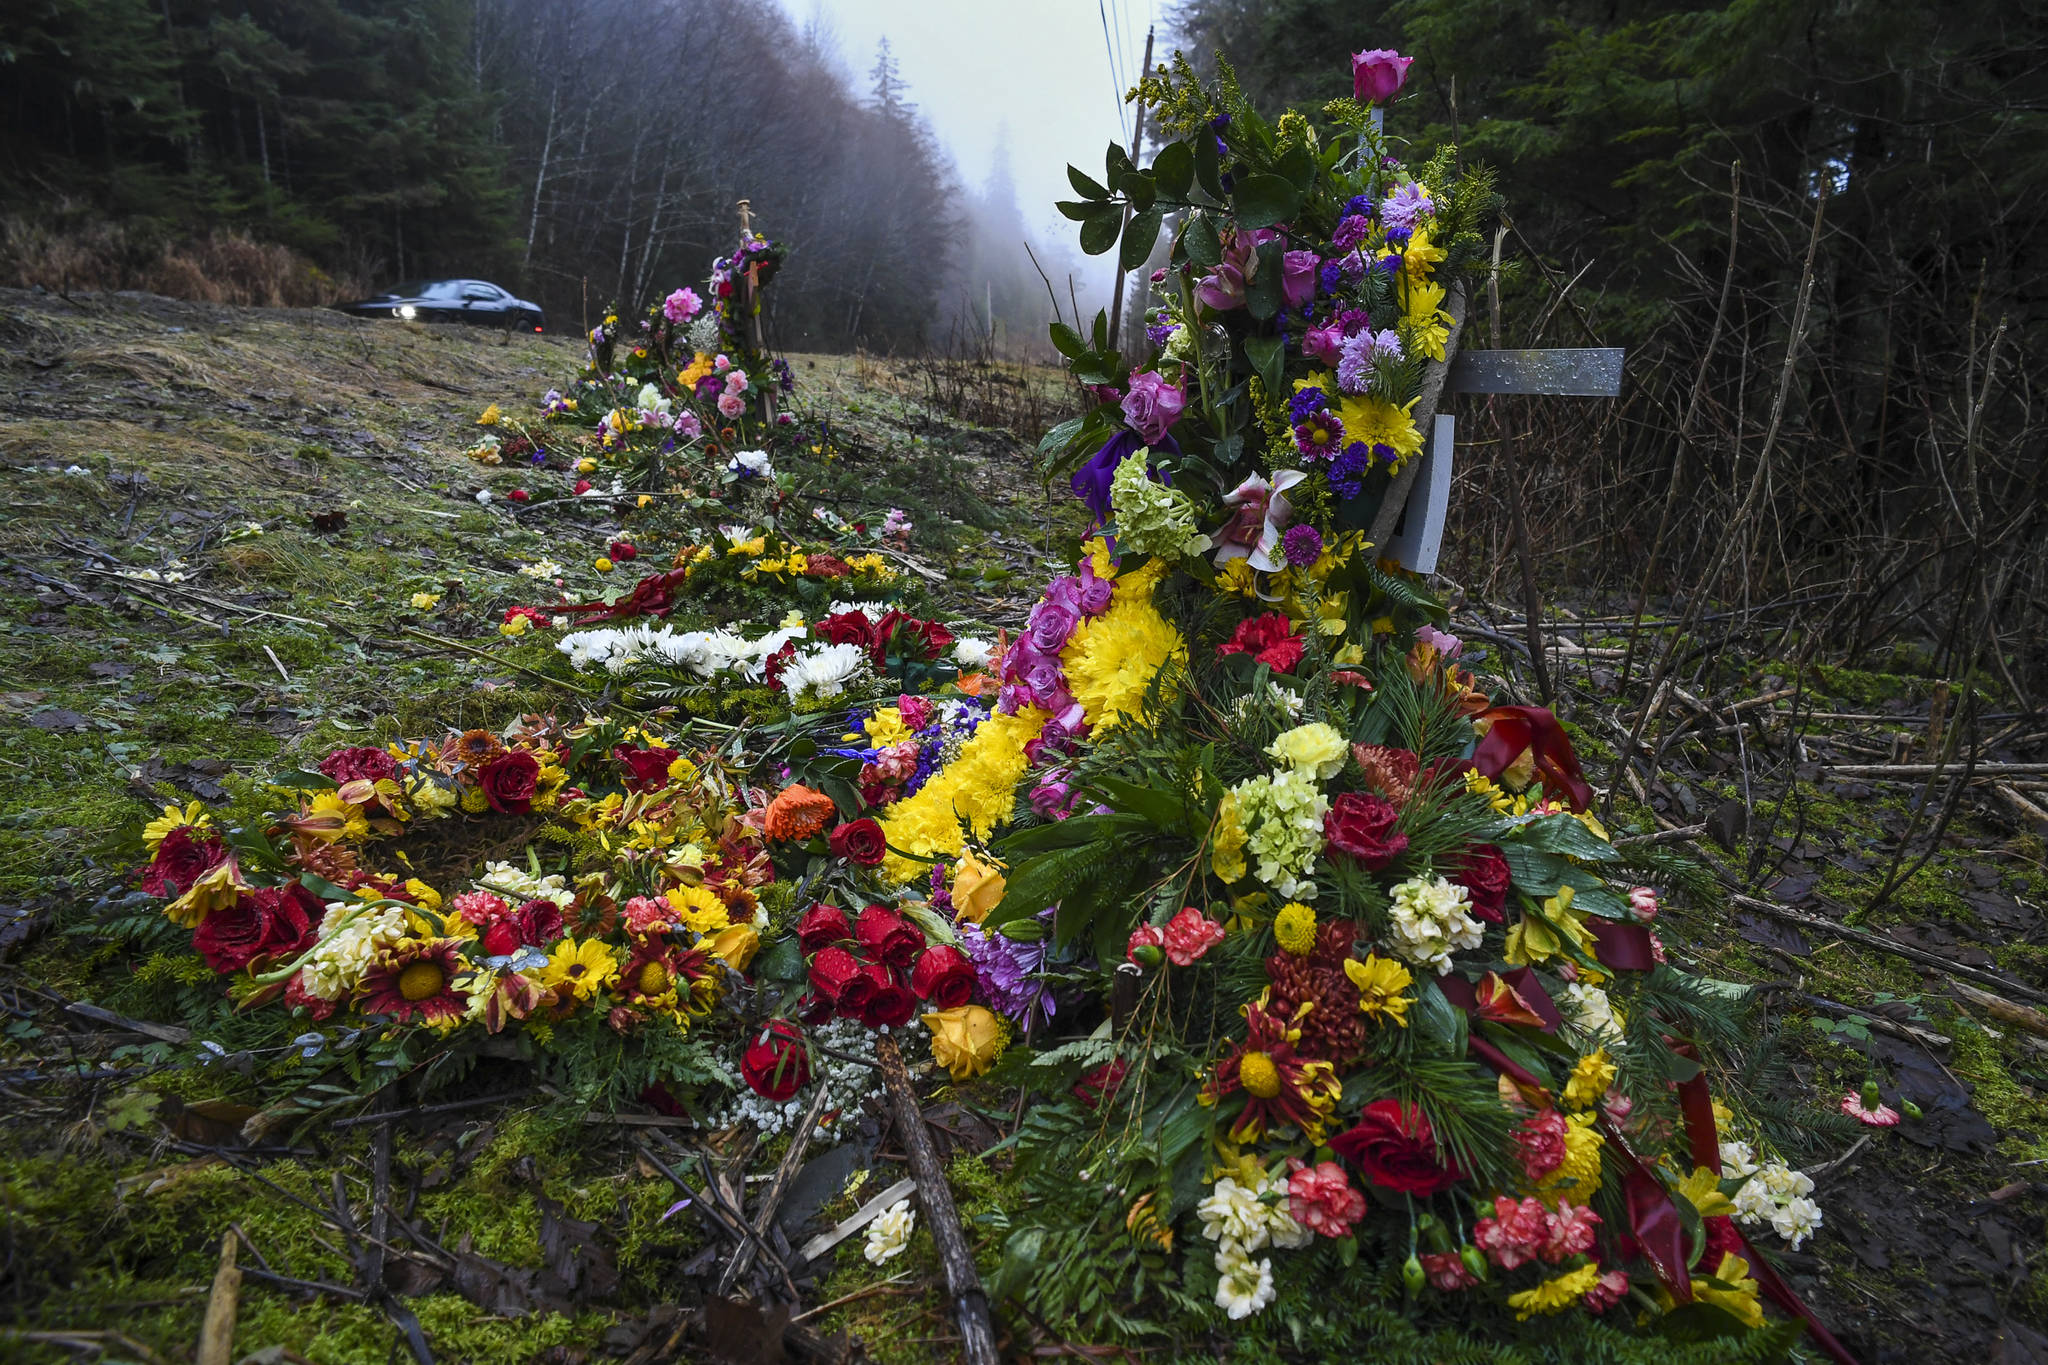 Two crosses ladened with flowers memorialize a 19-year-old woman and a 15-year-old boy who were killed in an vehicle accident near Mile 20 on Glacier Highway on Nov. 21. Two others were injured. (Michael Penn | Juneau Empire)